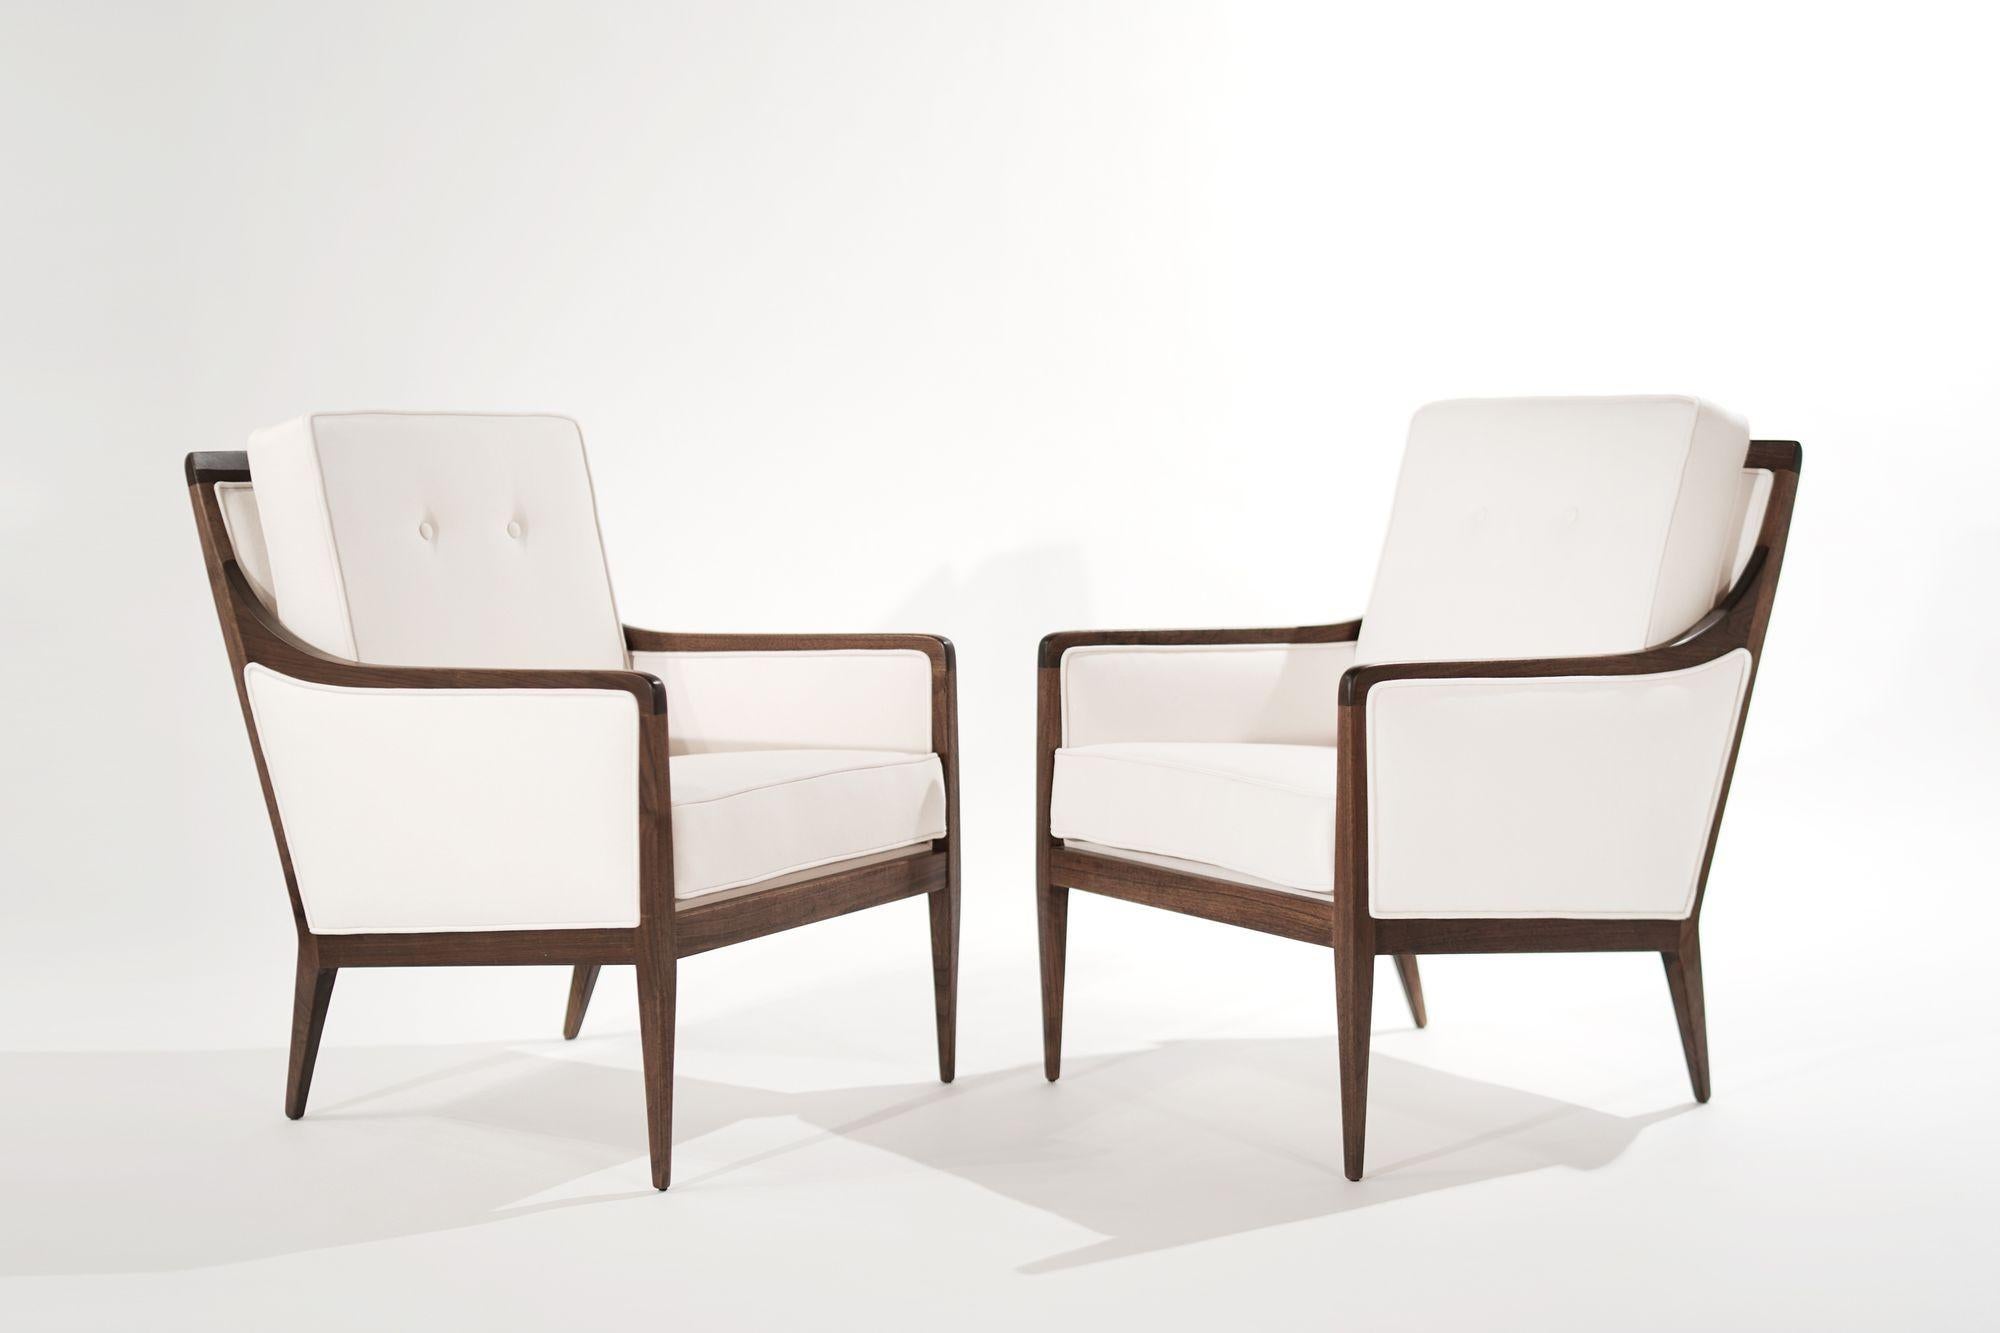 American Set of Lounge Chairs by Milo Baughman, Country Village Collection, C. 1950s For Sale